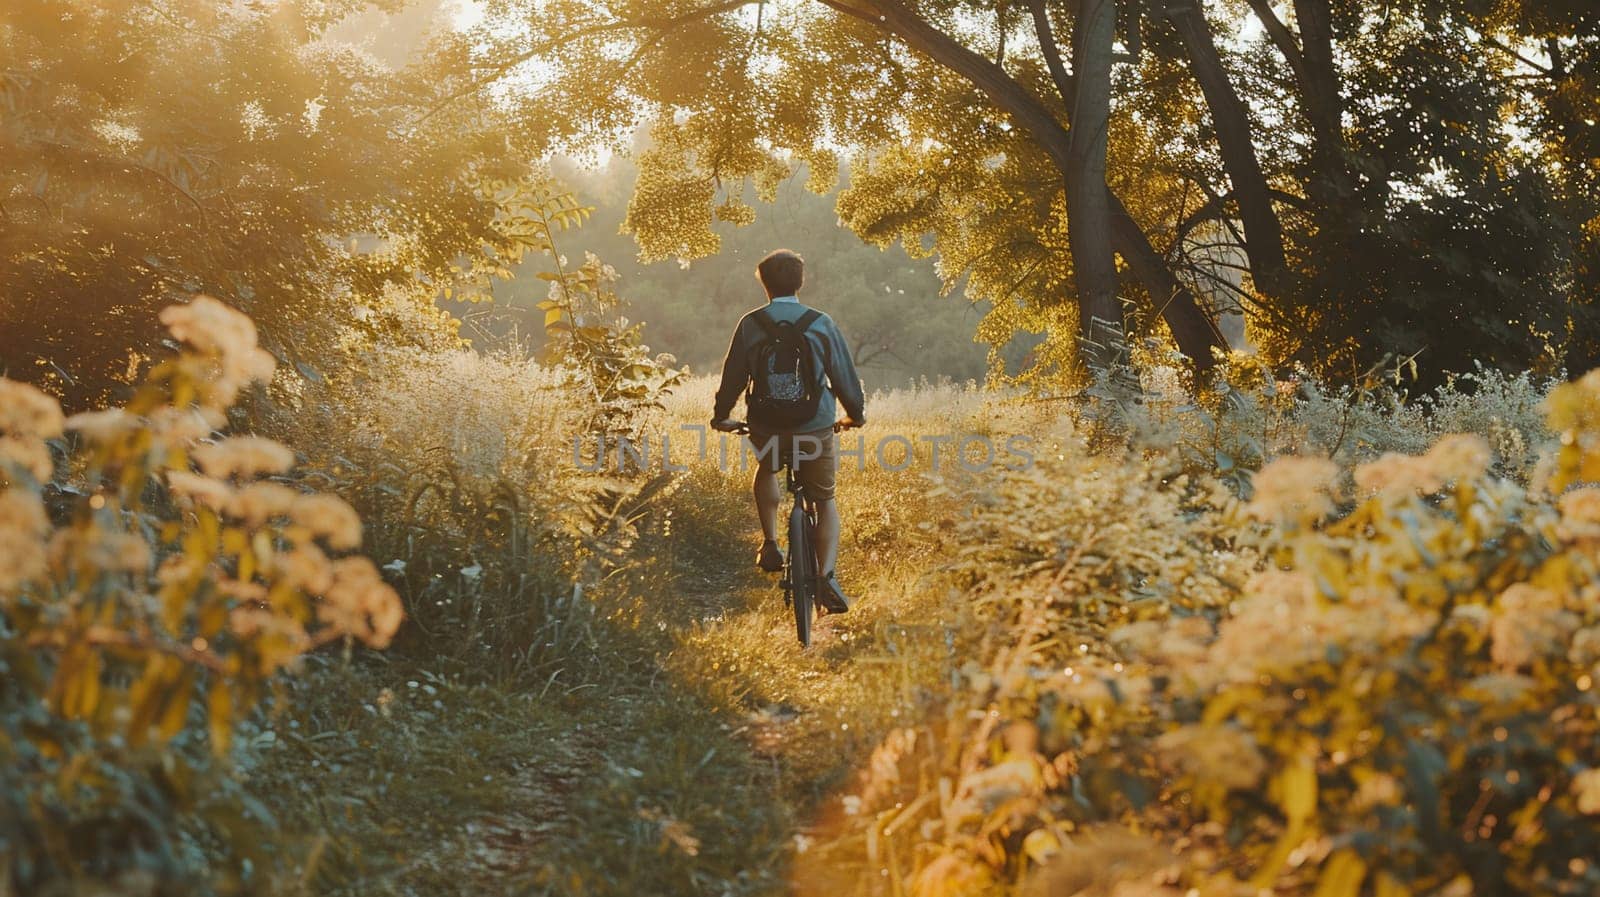 Active 25-30 year old man enjoys peaceful bike ride through lush nature, embodies fitness, health, and summer tranquility